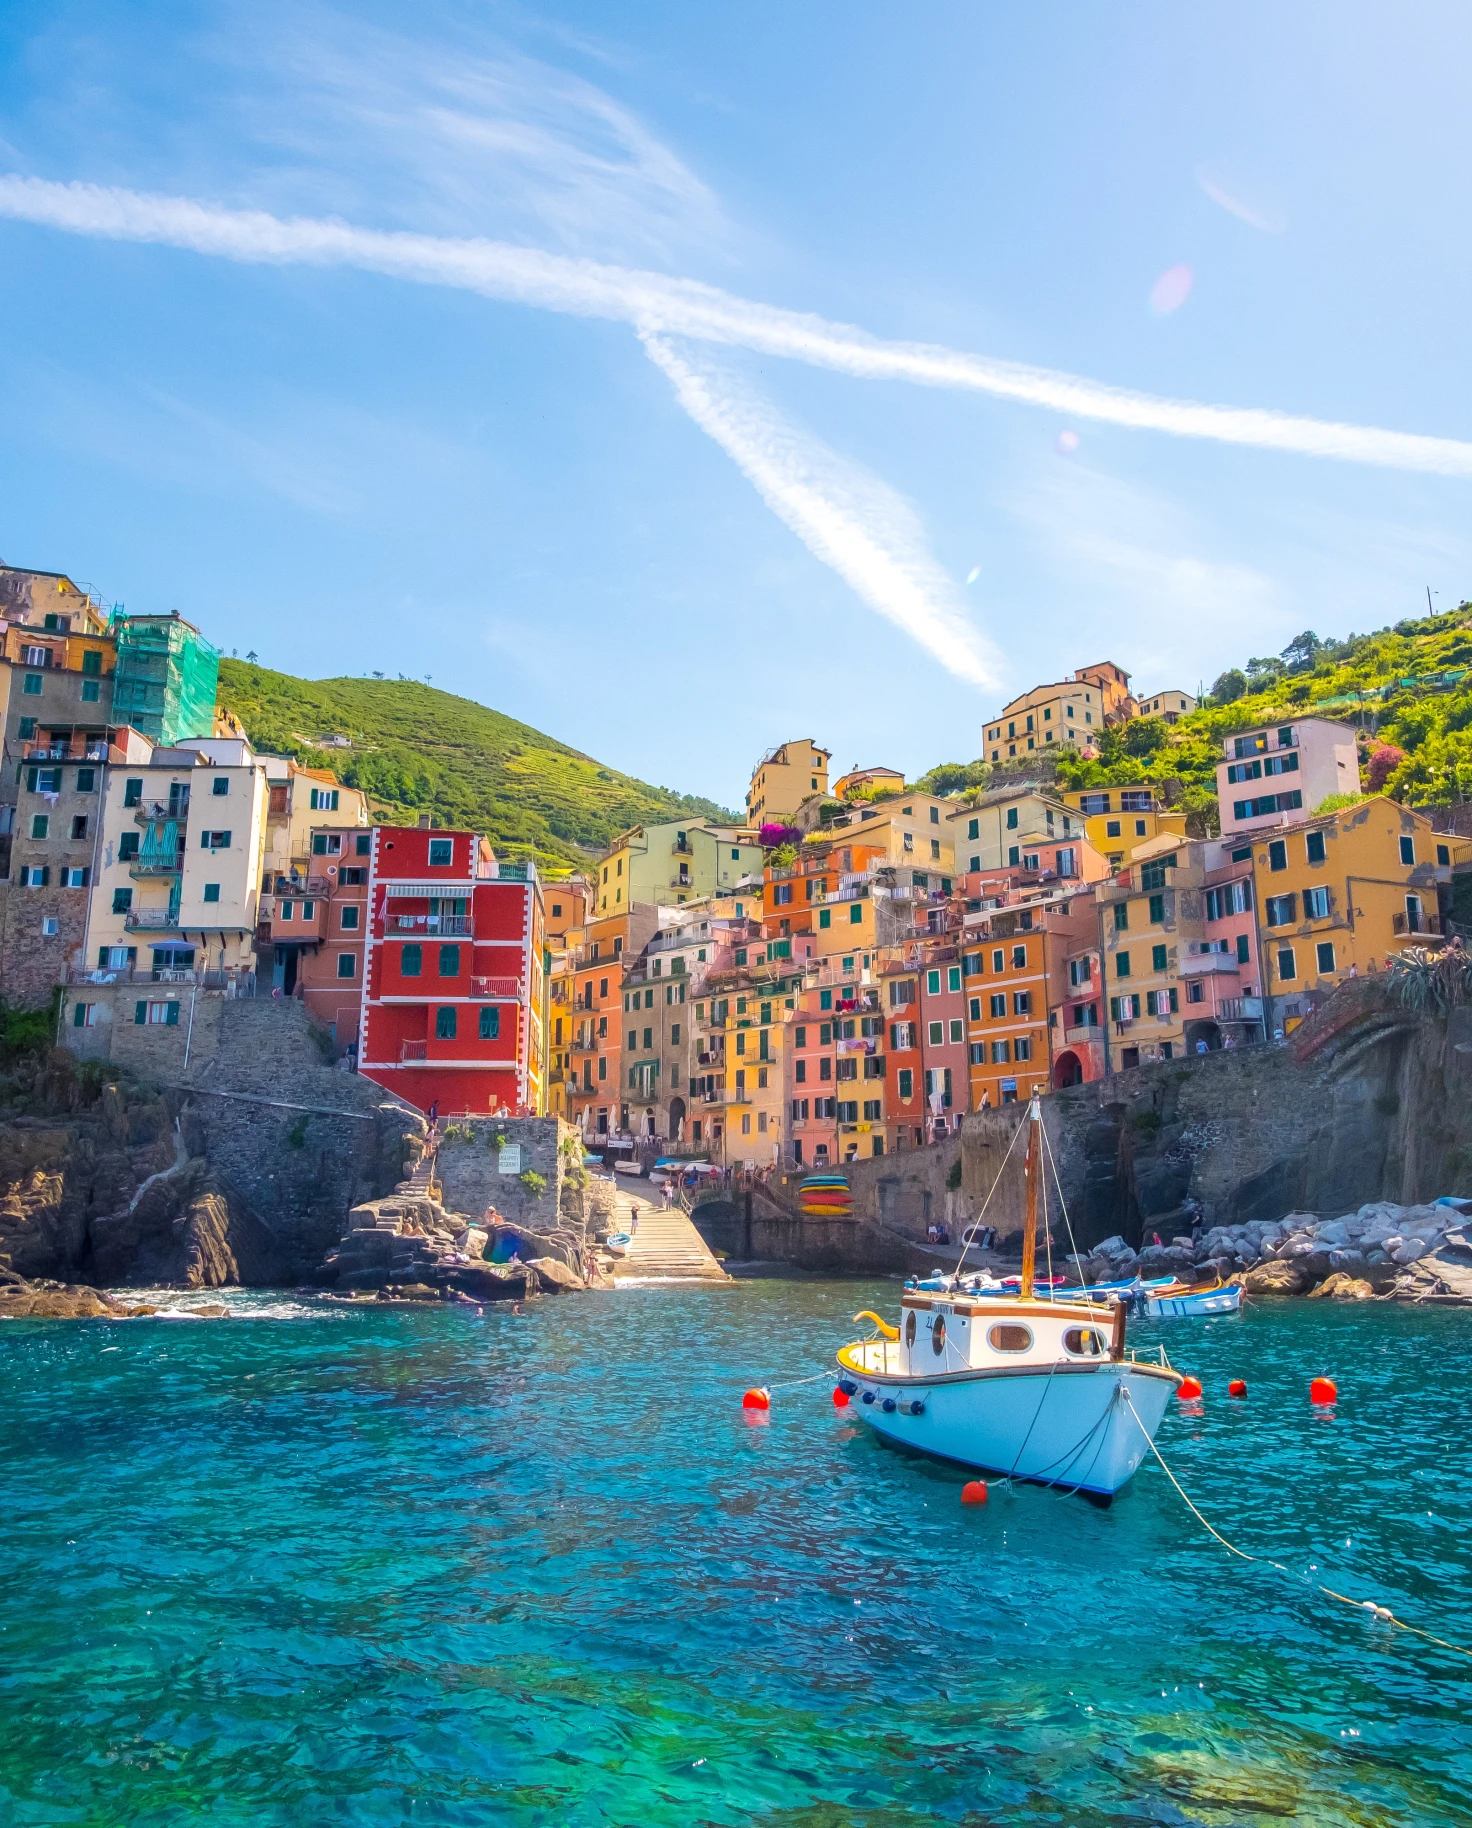 Orange, yellow and blue colorful houses sitting on a rocky cliff overlooking a blue ocean with white boats in Cinque Terre, Italy.